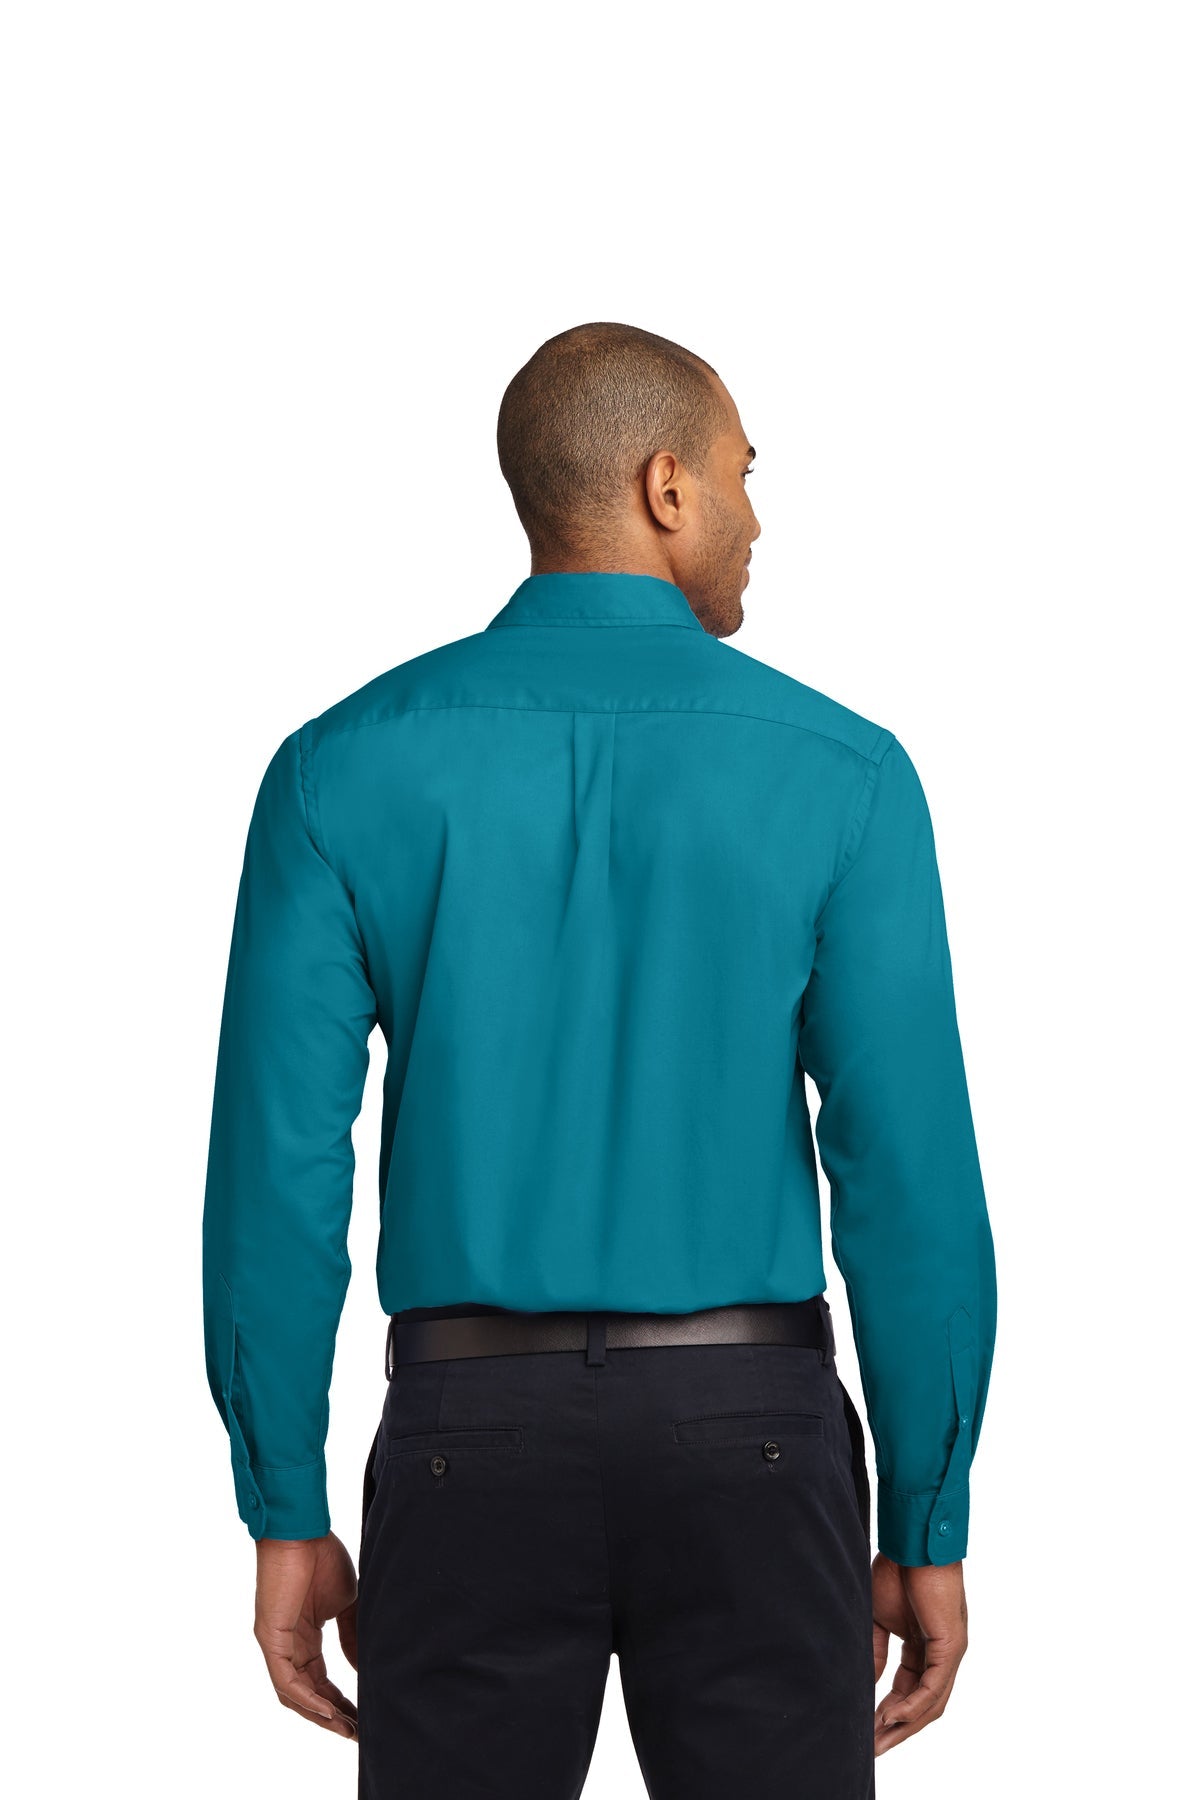 port authority_s608es _teal green_company_logo_button downs